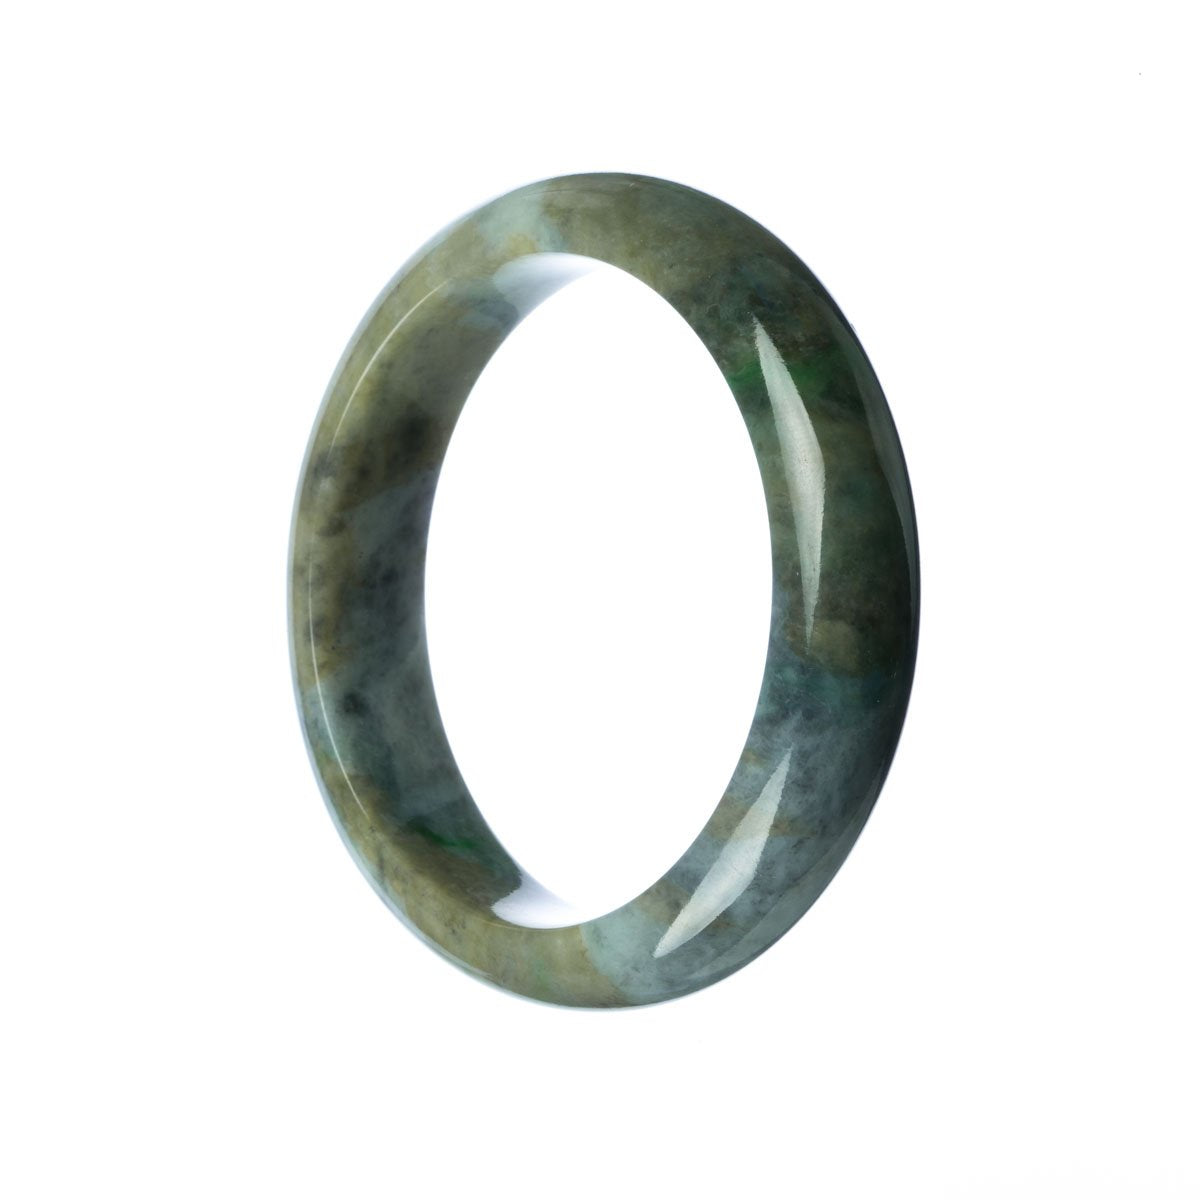 A beautiful grey green Burmese jade bangle bracelet with a half moon shape, perfect for adding a touch of elegance to any outfit.